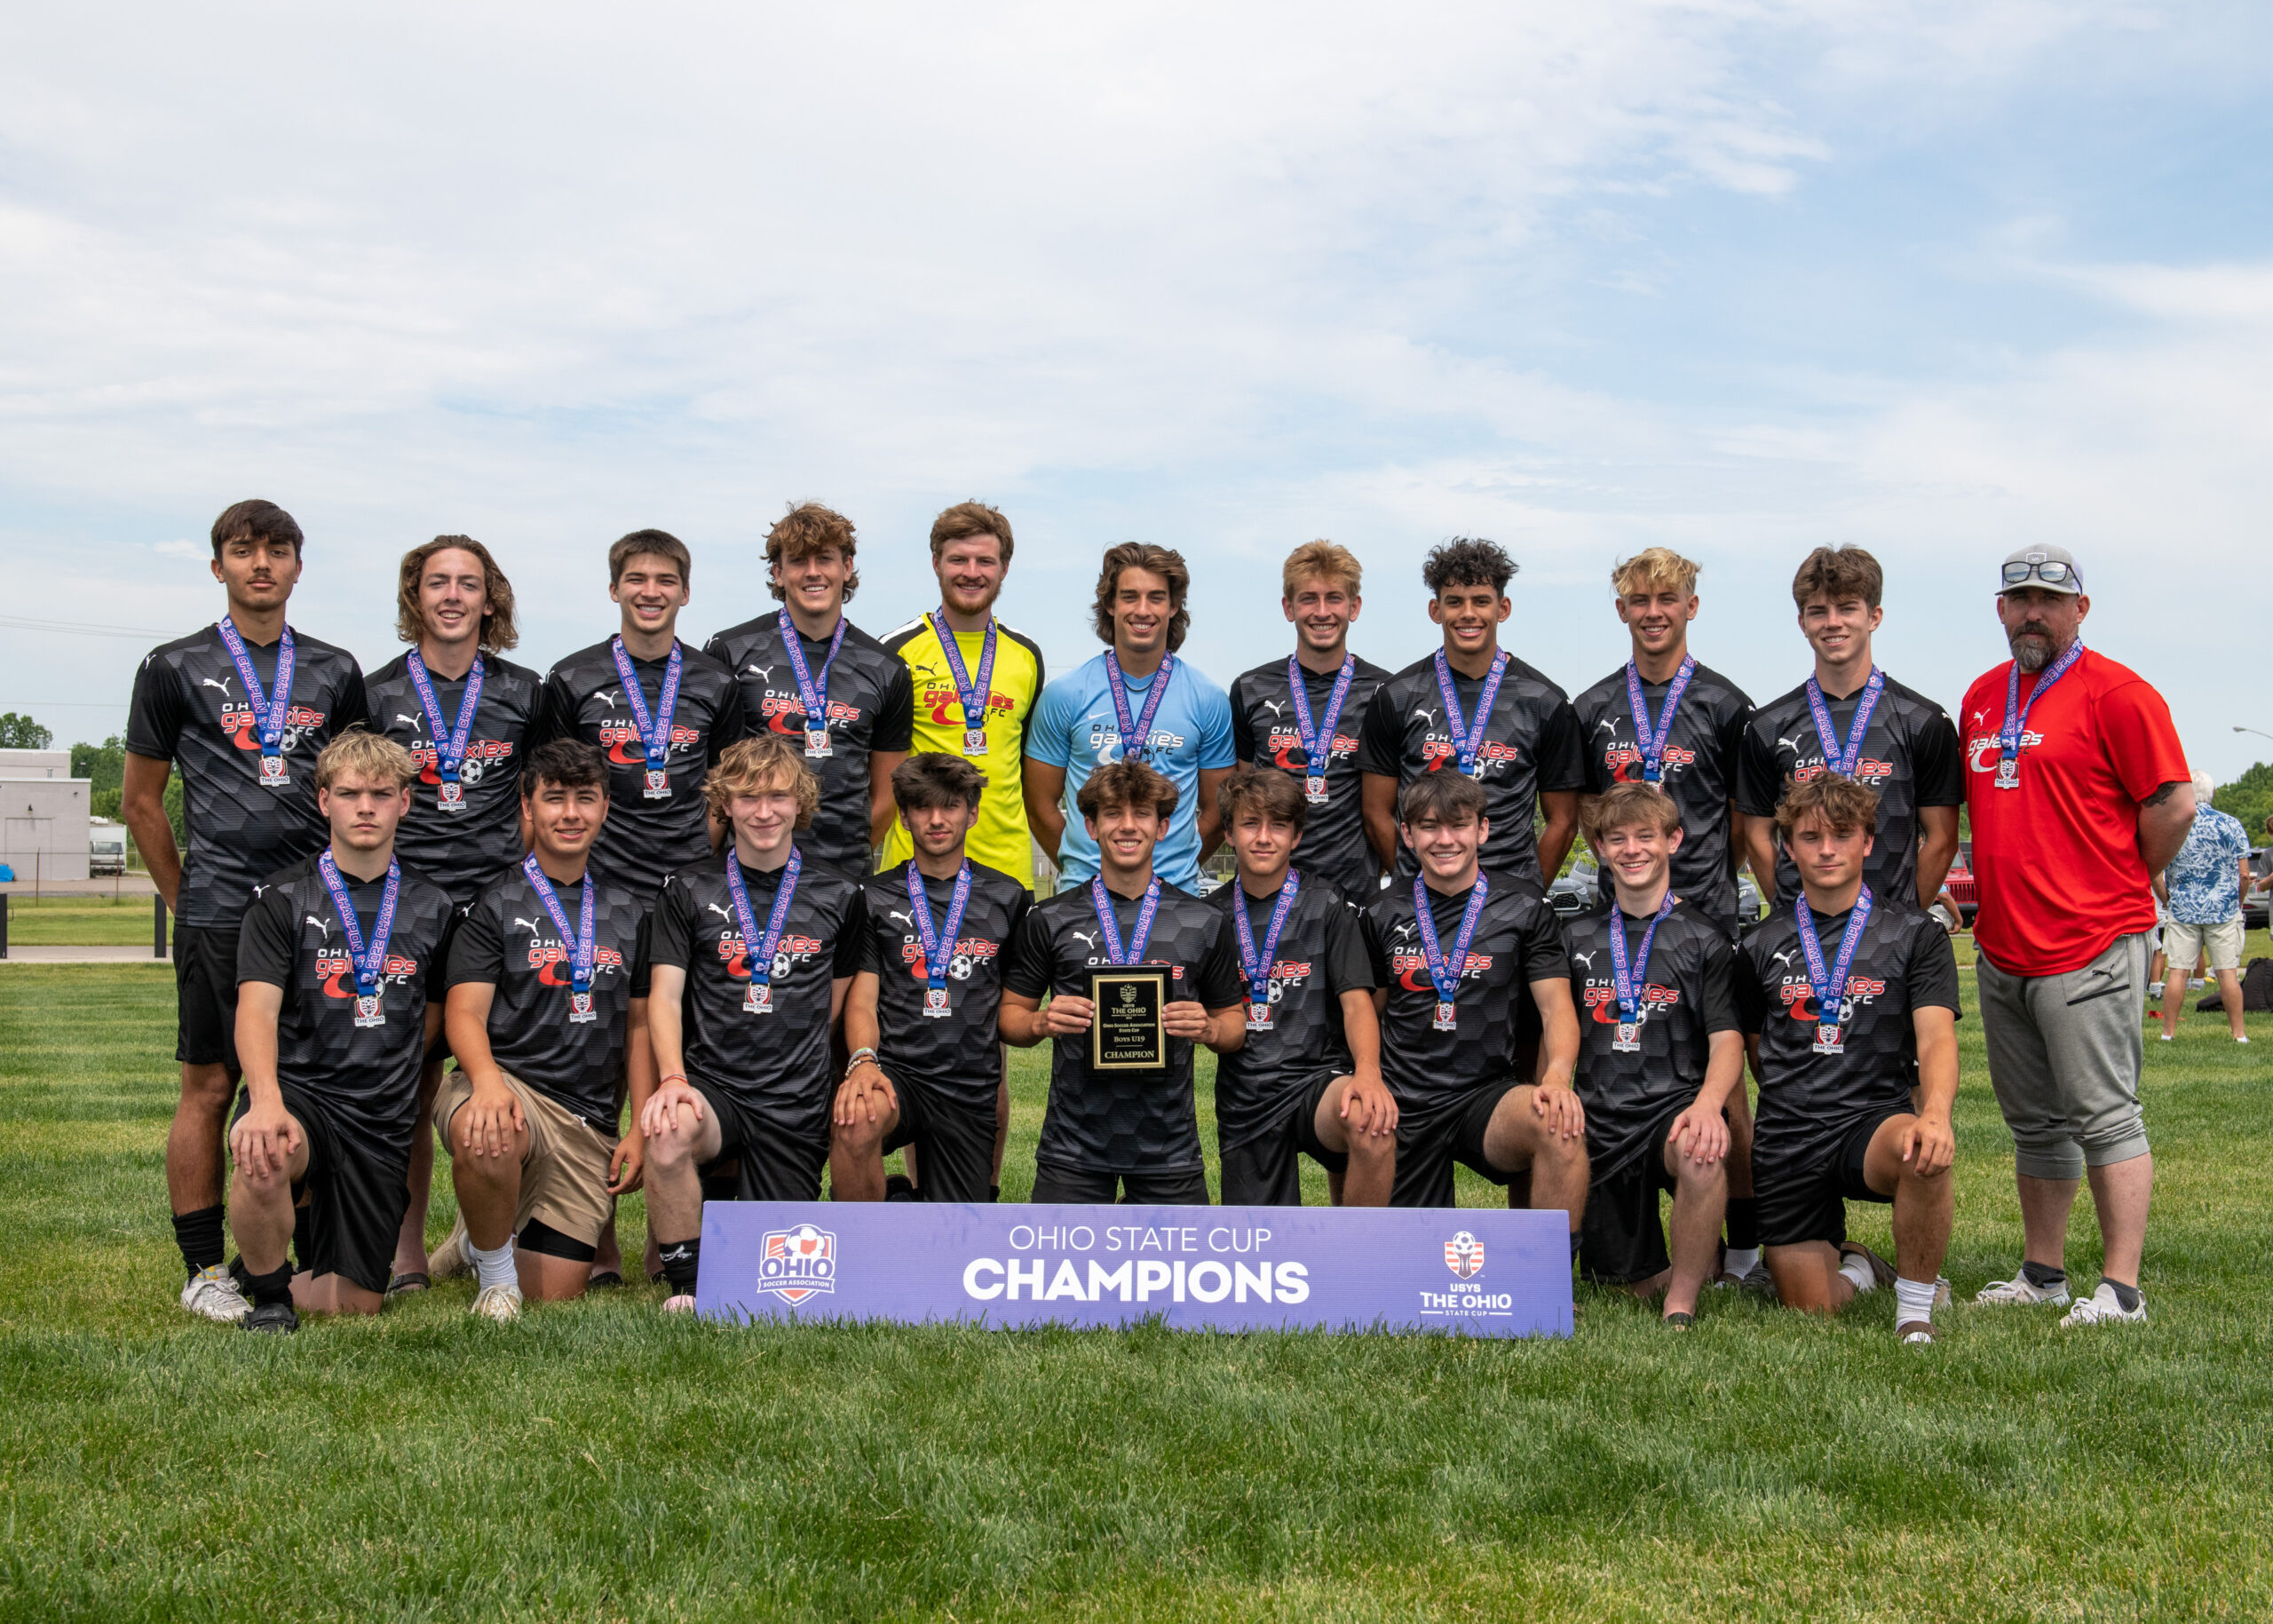 The Ohio State Cup 2021